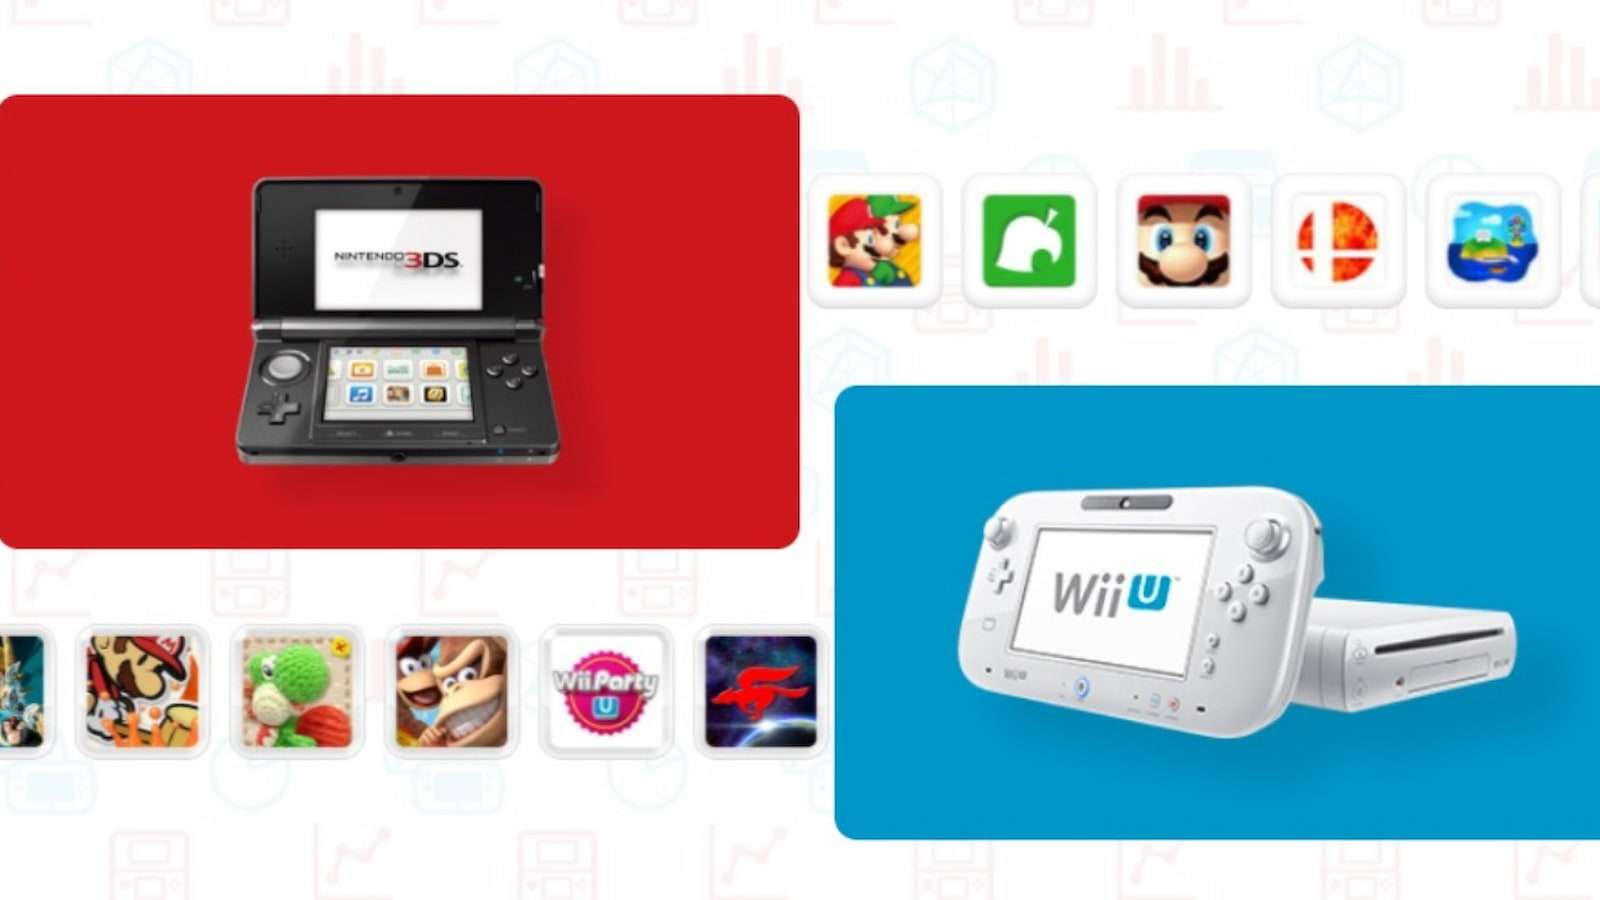 Nintendo 3DS and Wii U icons